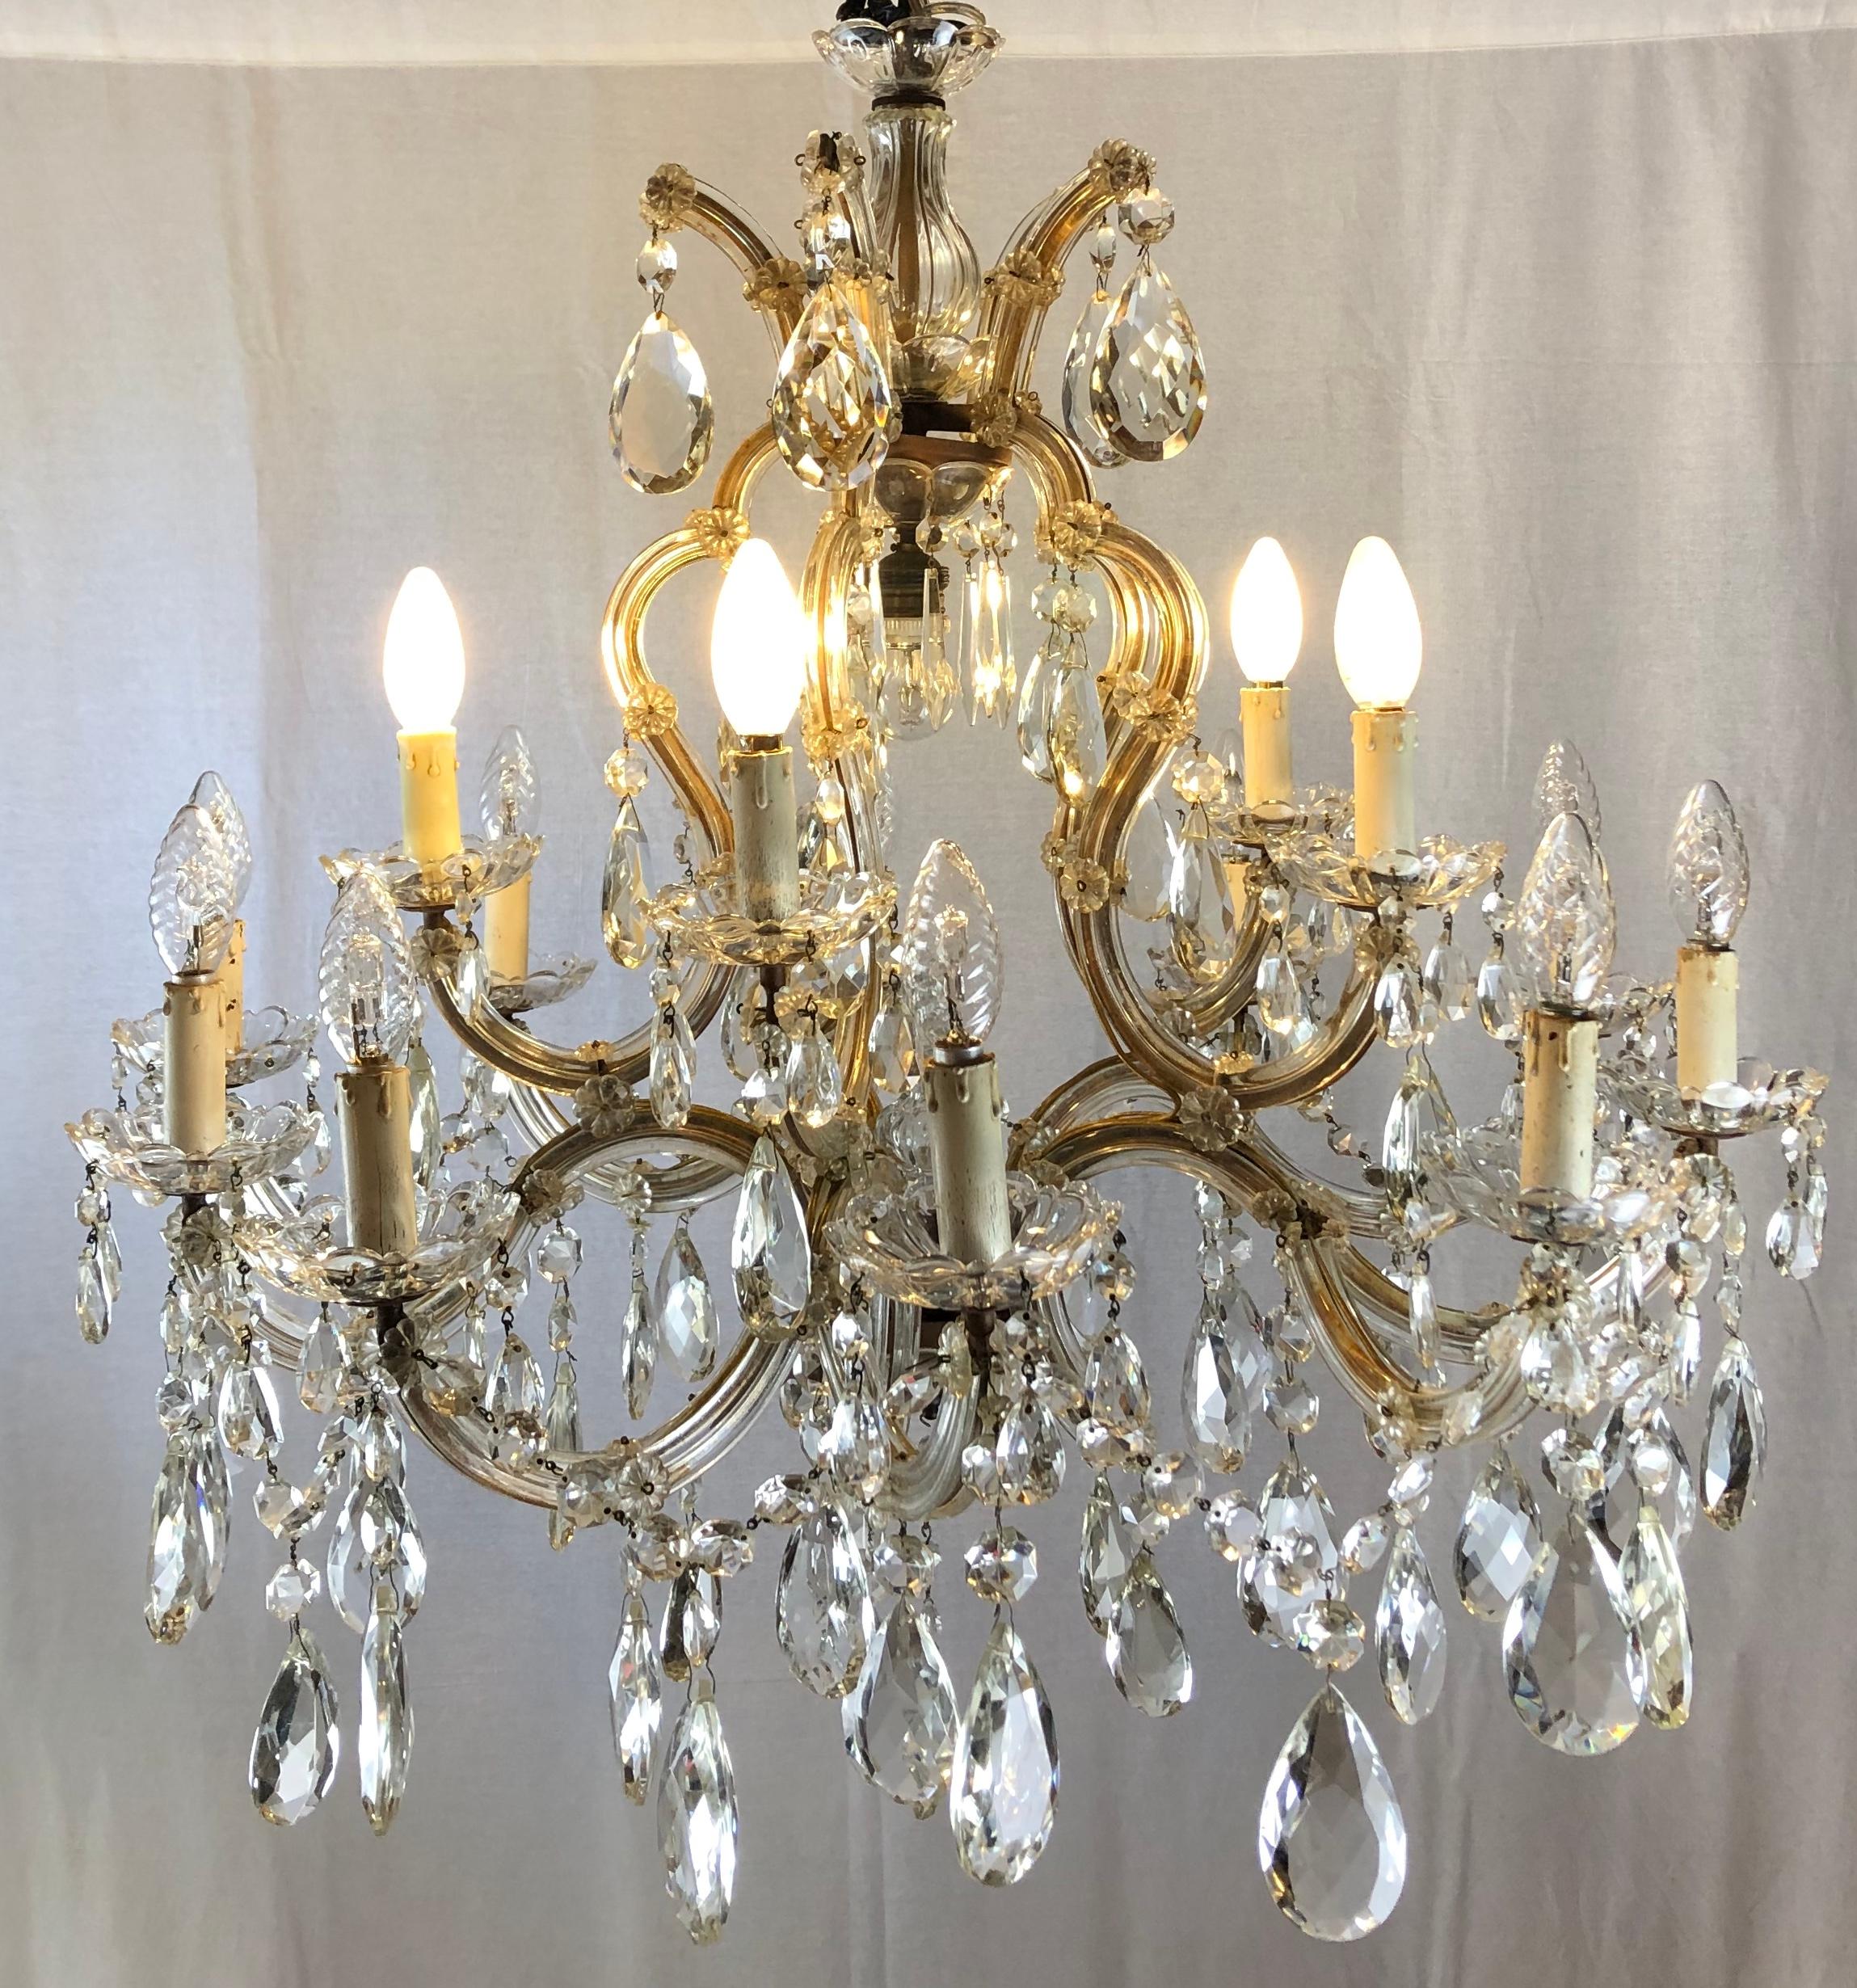 A large French Maria Theresa sixteen-light chandelier or ceiling light of faceted crystal, cut glass and gilt metal featuring serpentine arms, each candle light features floral designed glass, dangling pendants and decorative bobeche.

Beautiful